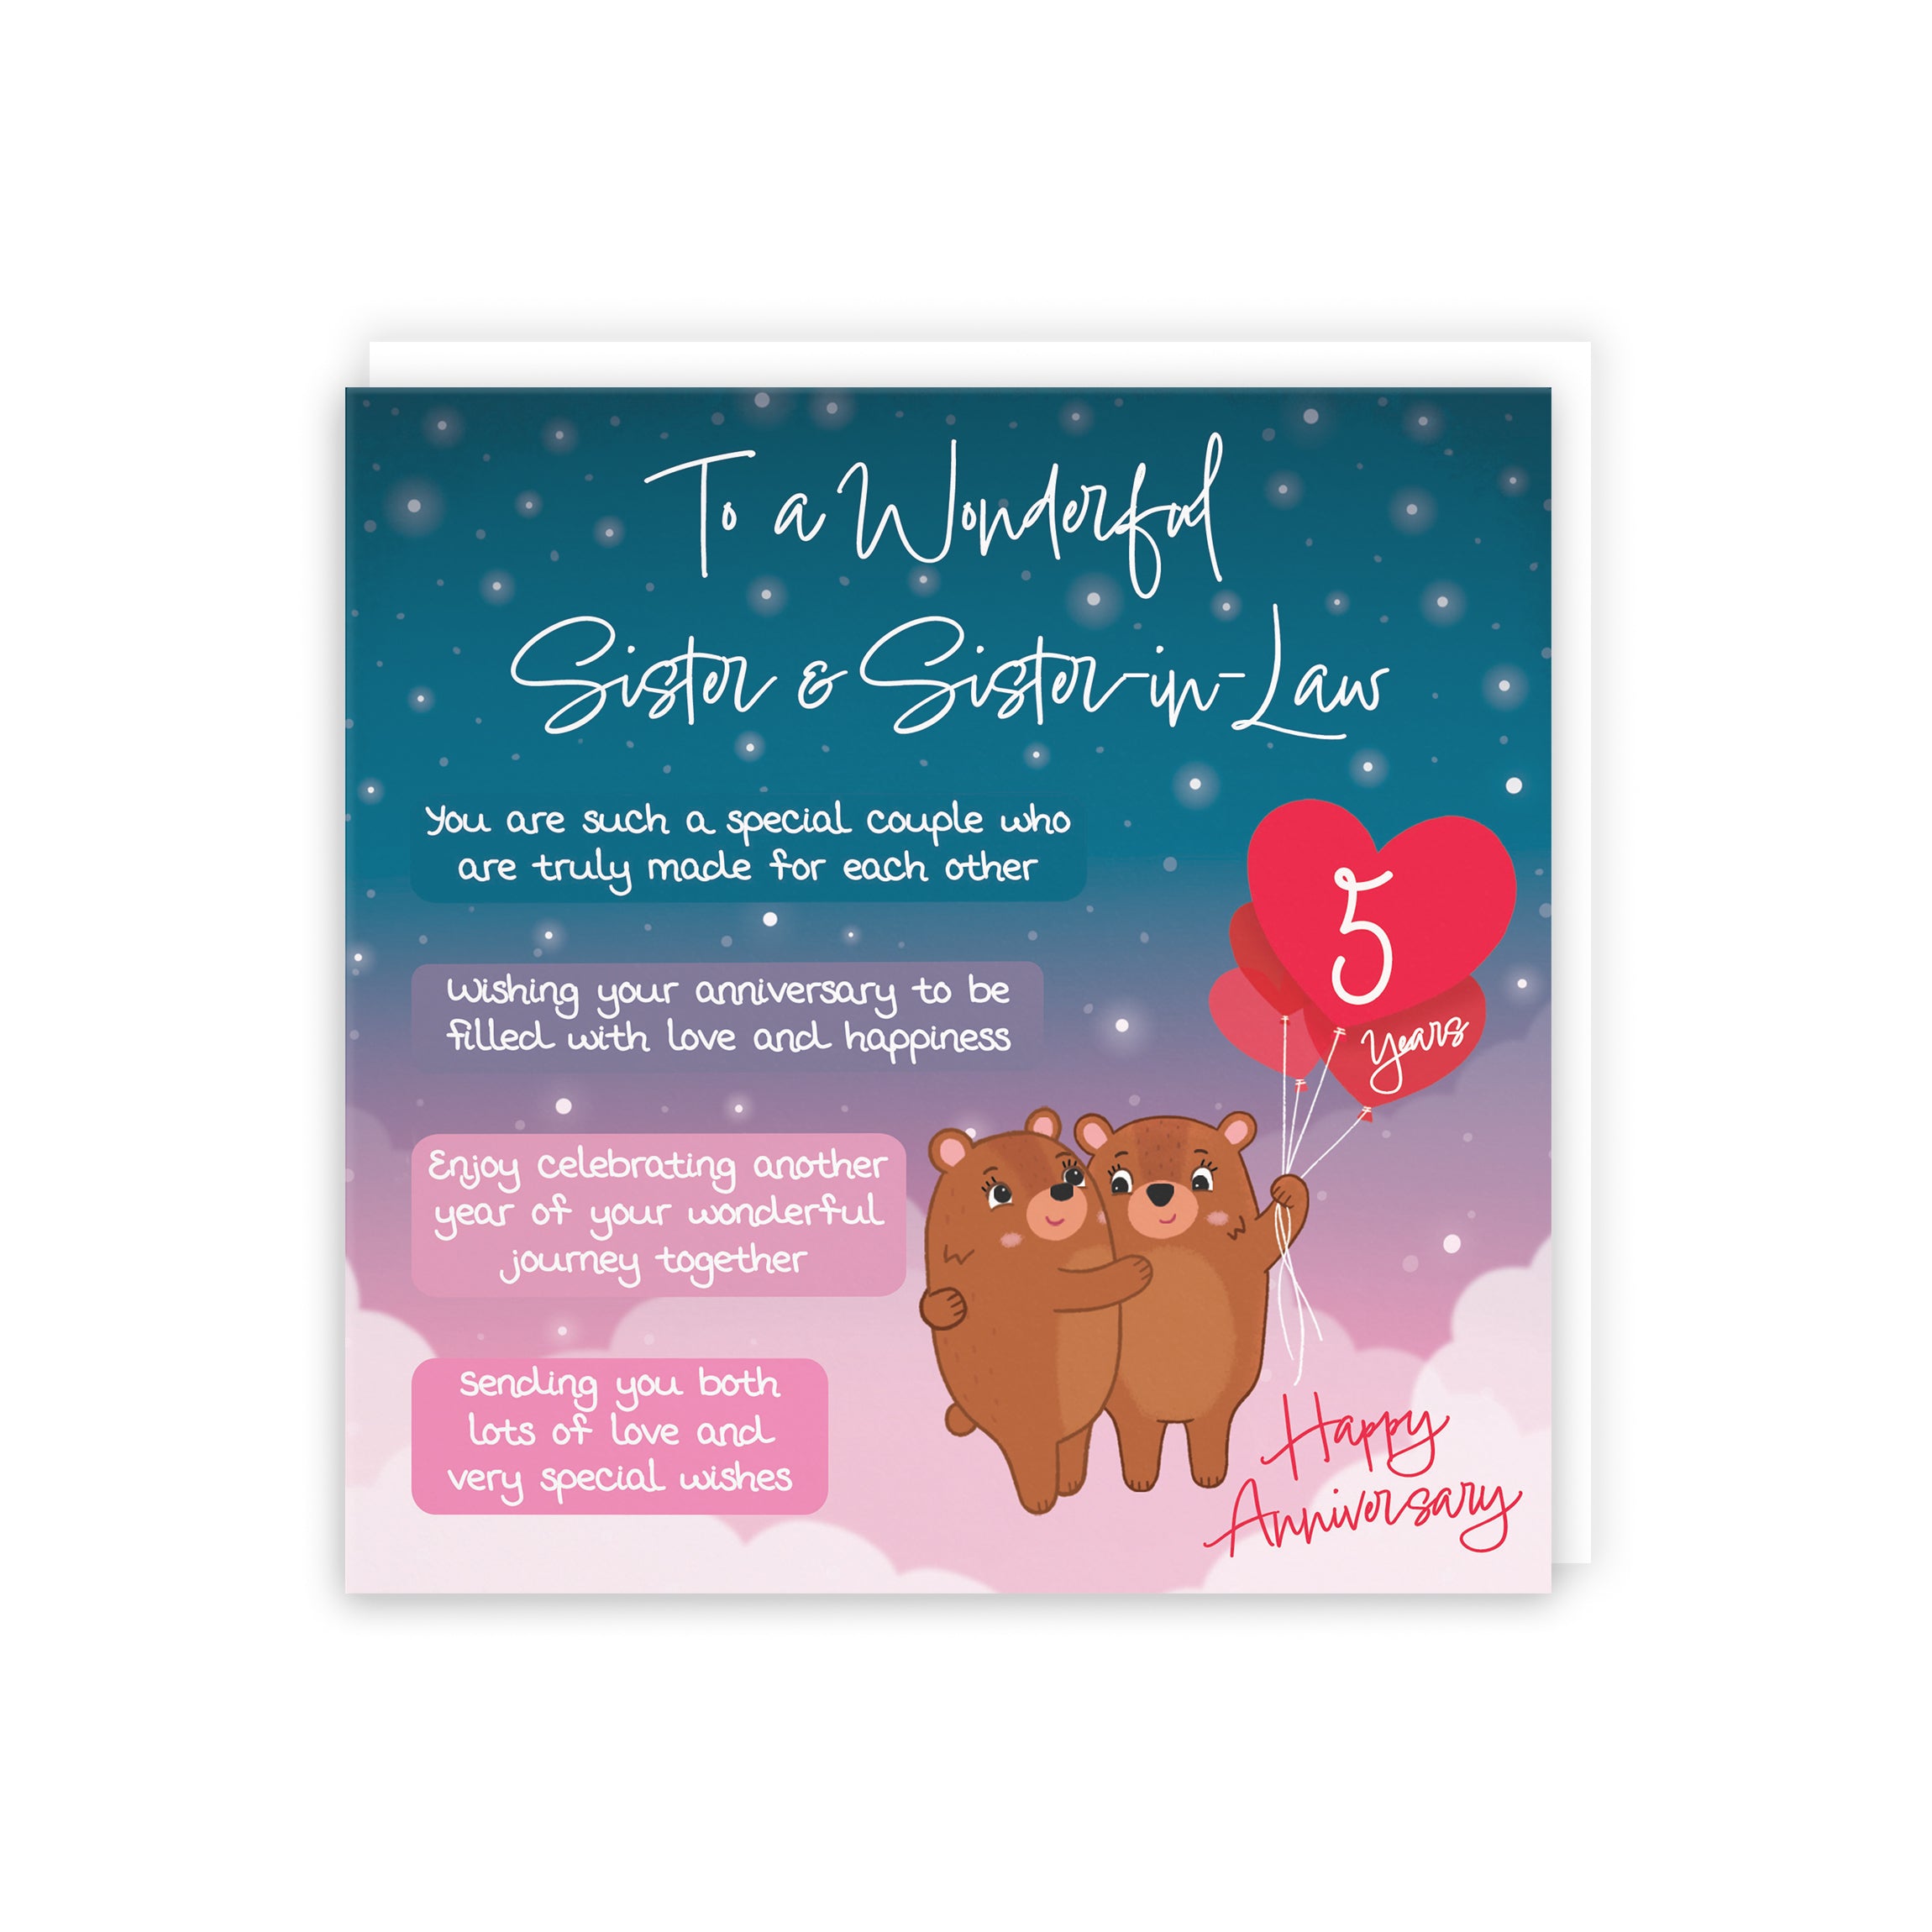 Sister And Sister In Law 5th Anniversary Card Starry Night Cute Bears